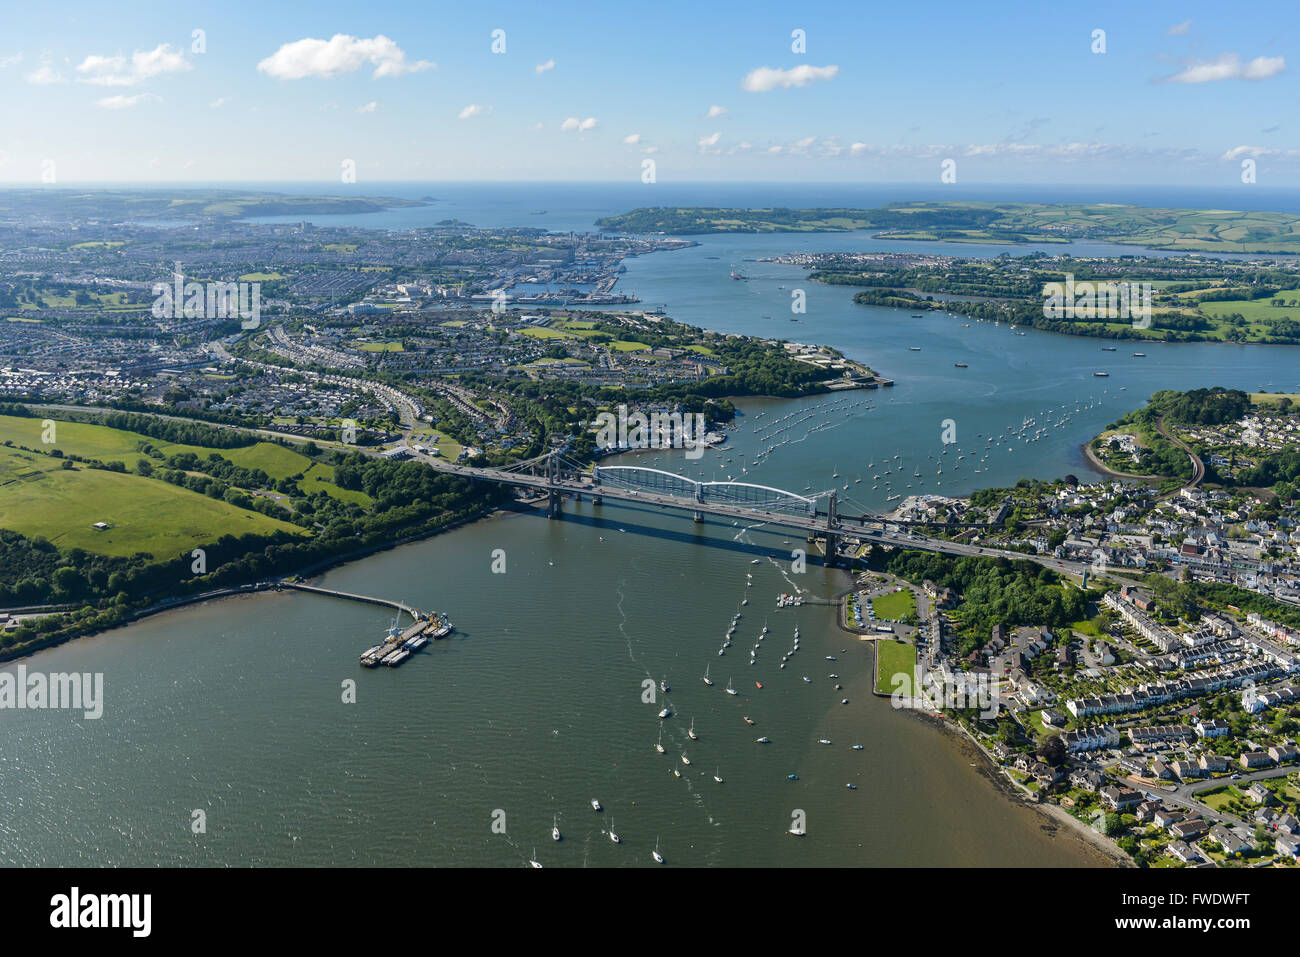 An aerial view of the Tamar Estuary with the road and railway bridges visible Stock Photo